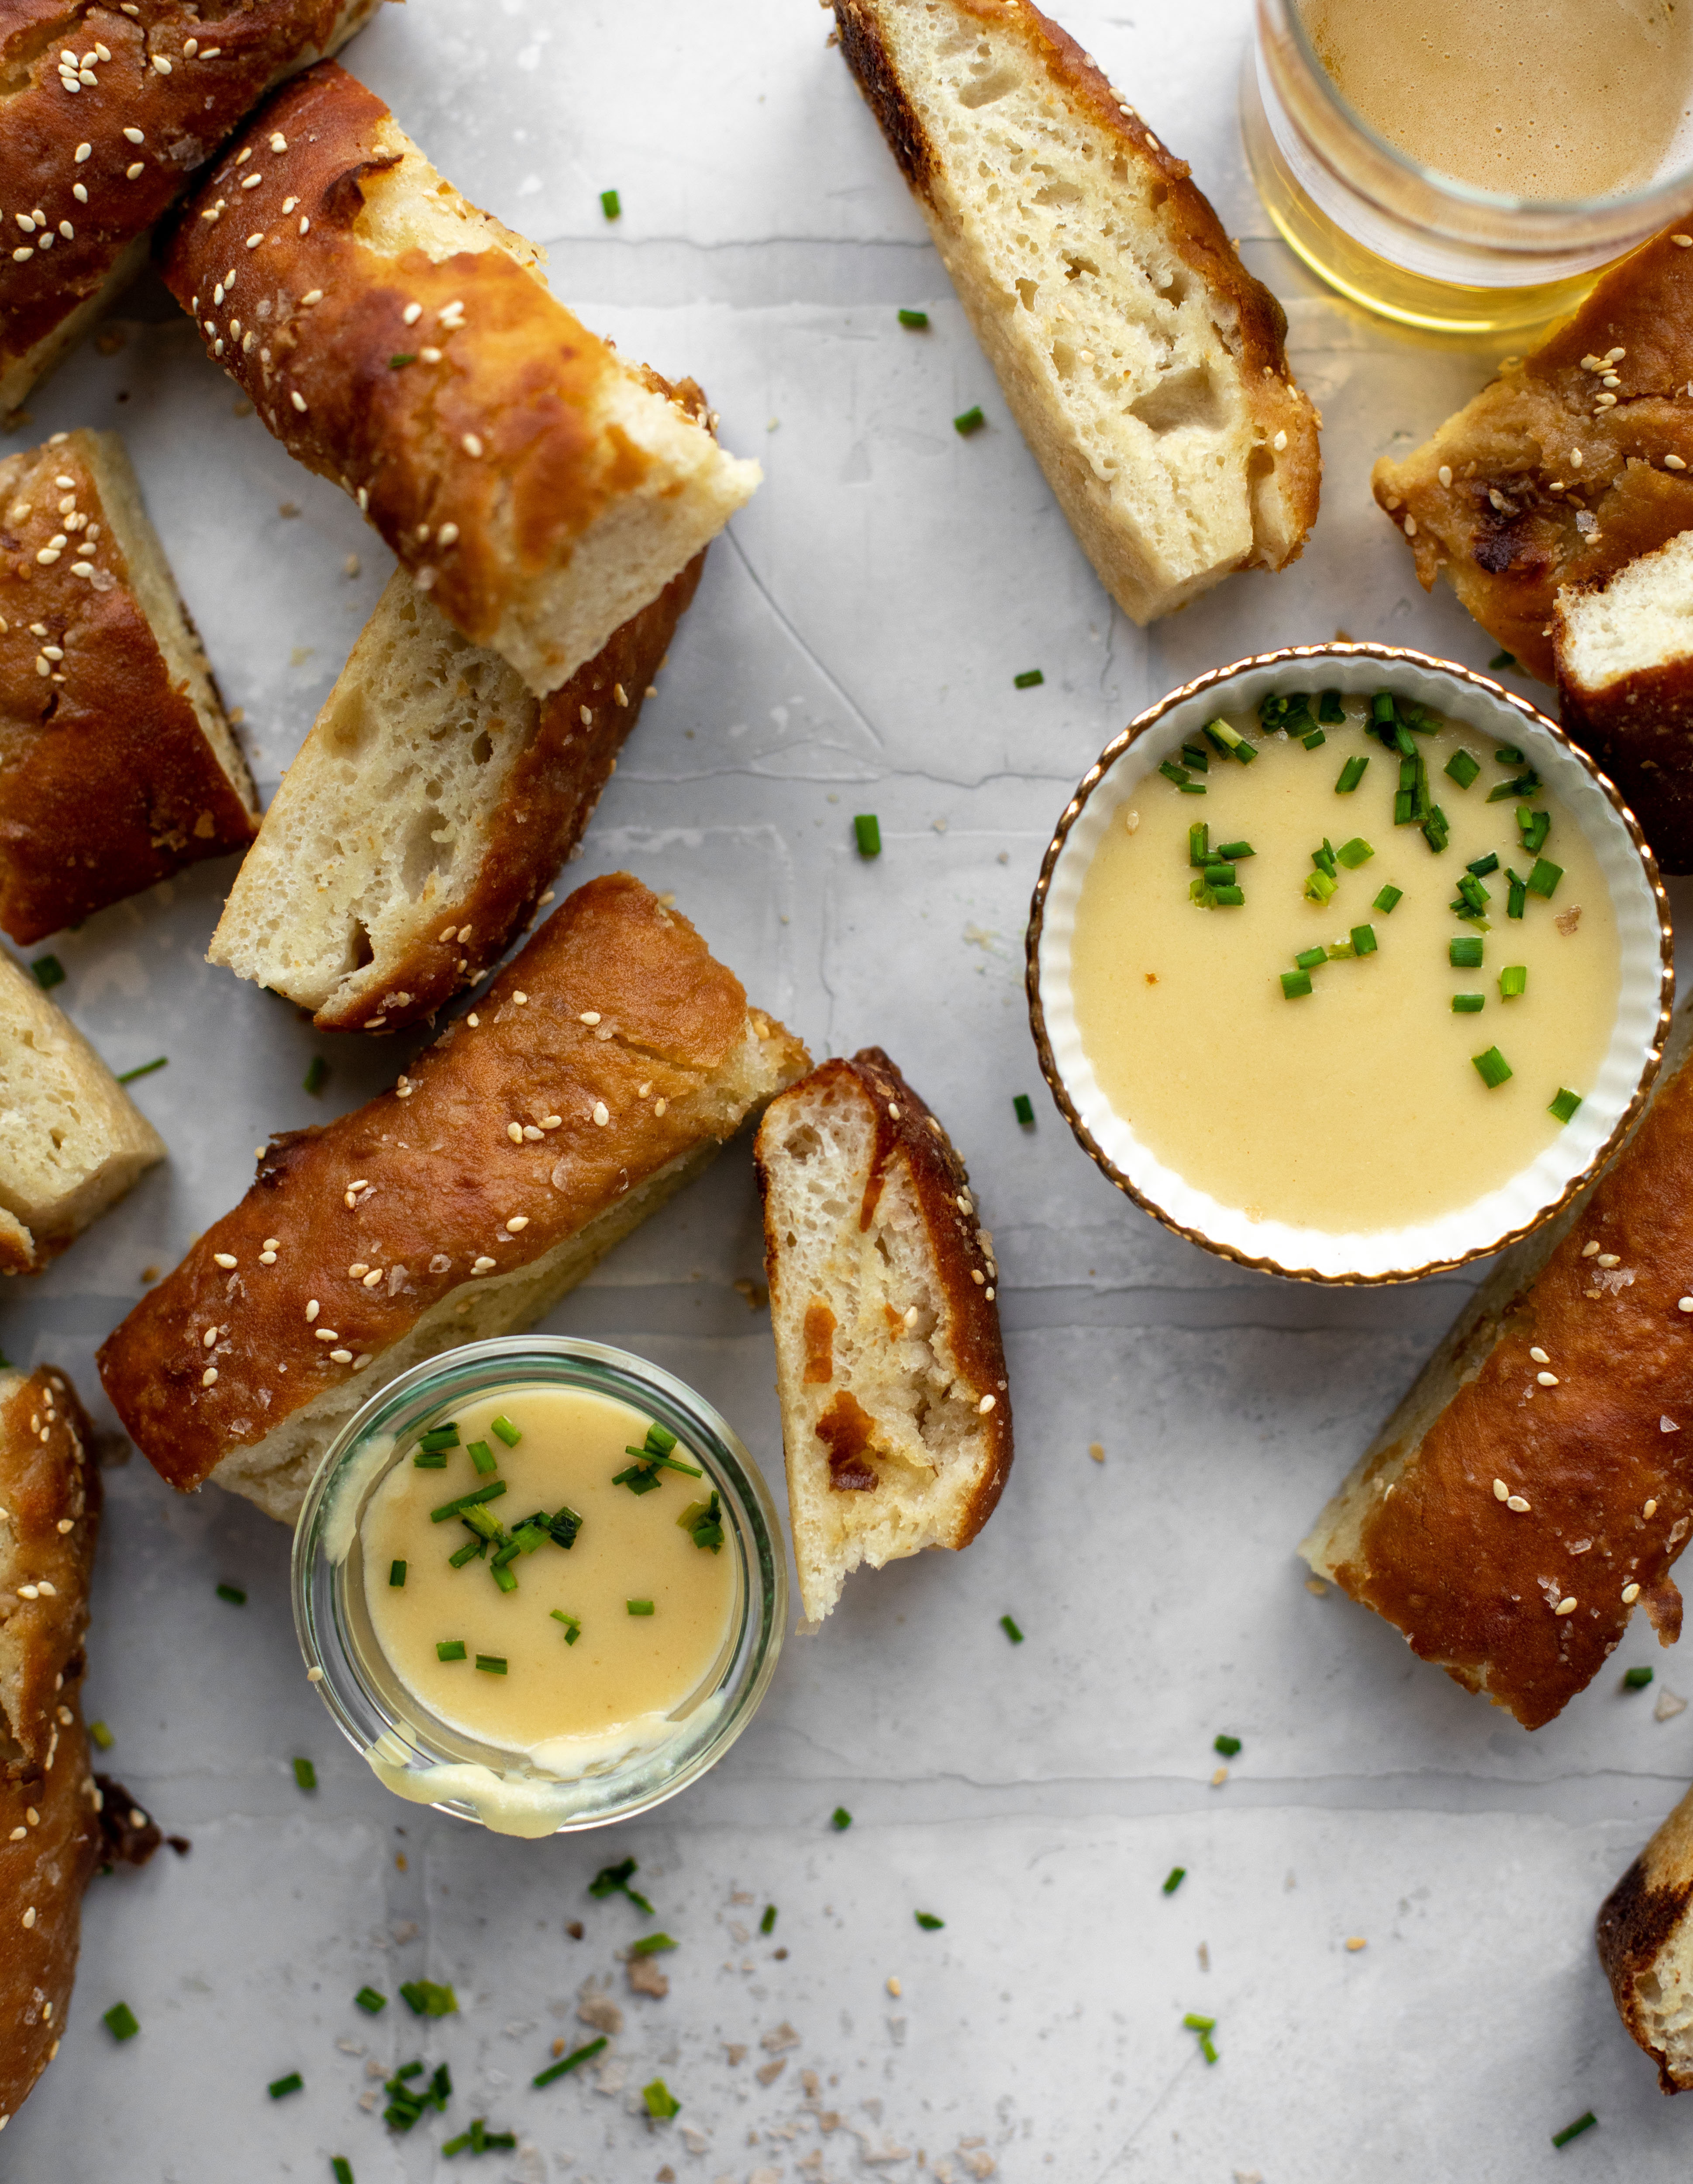 This sesame pretzel focaccia bread is amazing! Almost like a soft pretzel with crispy edges. Serve with a delicious dijon beer cheese.